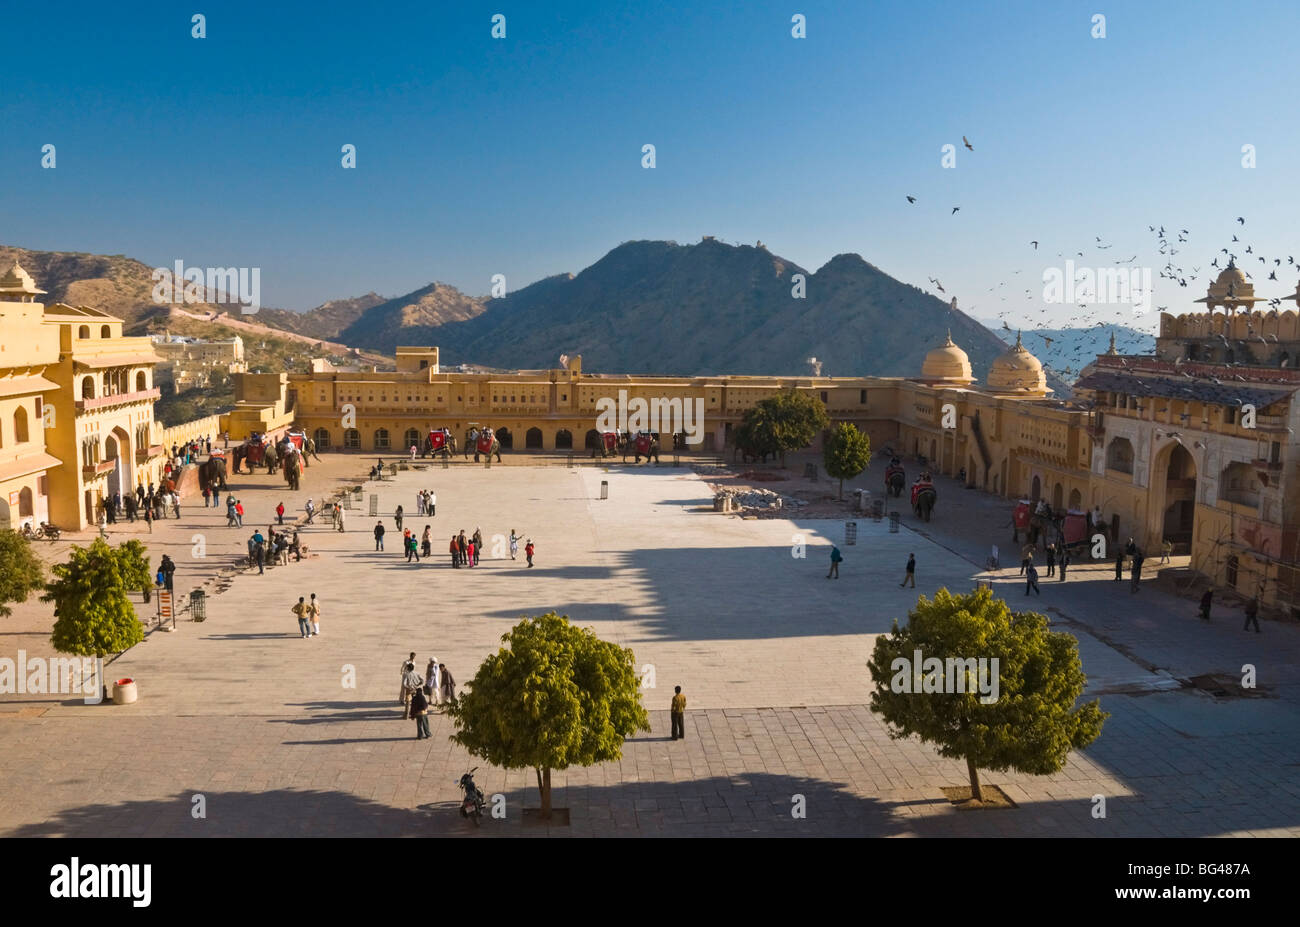 Aerial view of the Amber Fort, Jaipur, Rajasthan, India, Asia Stock Photo